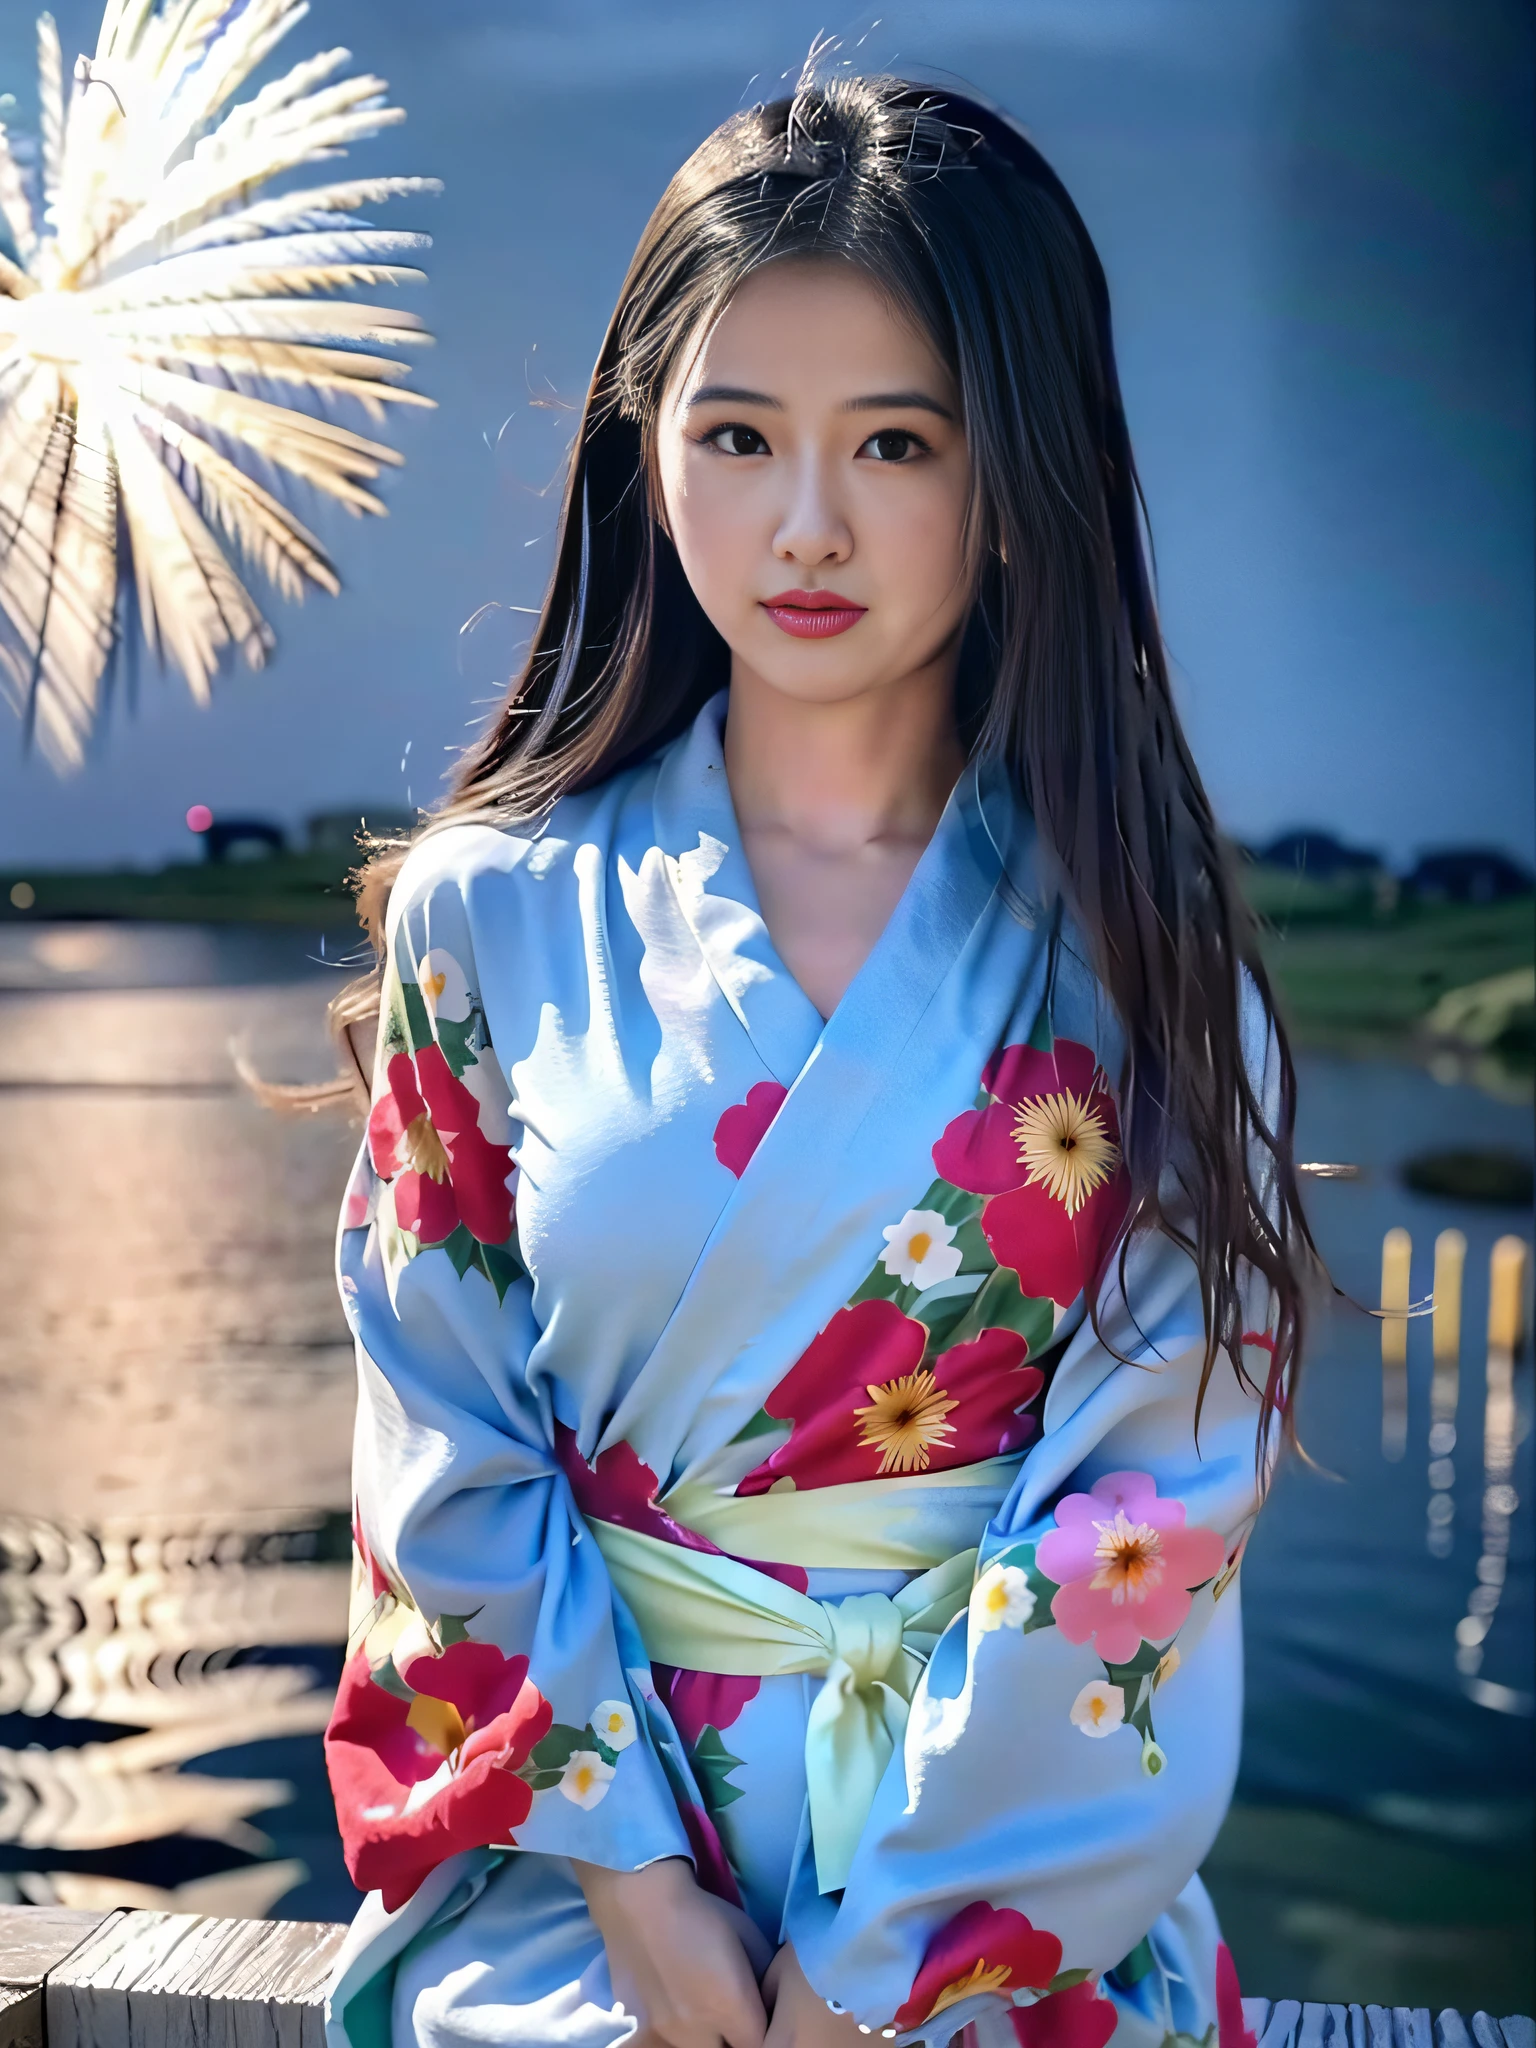 Arafe asian woman in kimono sitting on shelf on fireworks background, in a kimono, in a kimono, shinsui ito, portrait of a japanese teen, by Torii Kiyomoto, Young Gravure Idol, bath robe, wearing royal kimono, Wearing kimono, Wearing a colorful yukata, Young Pretty Gravure Idol, the face of a beautiful Japanese girl